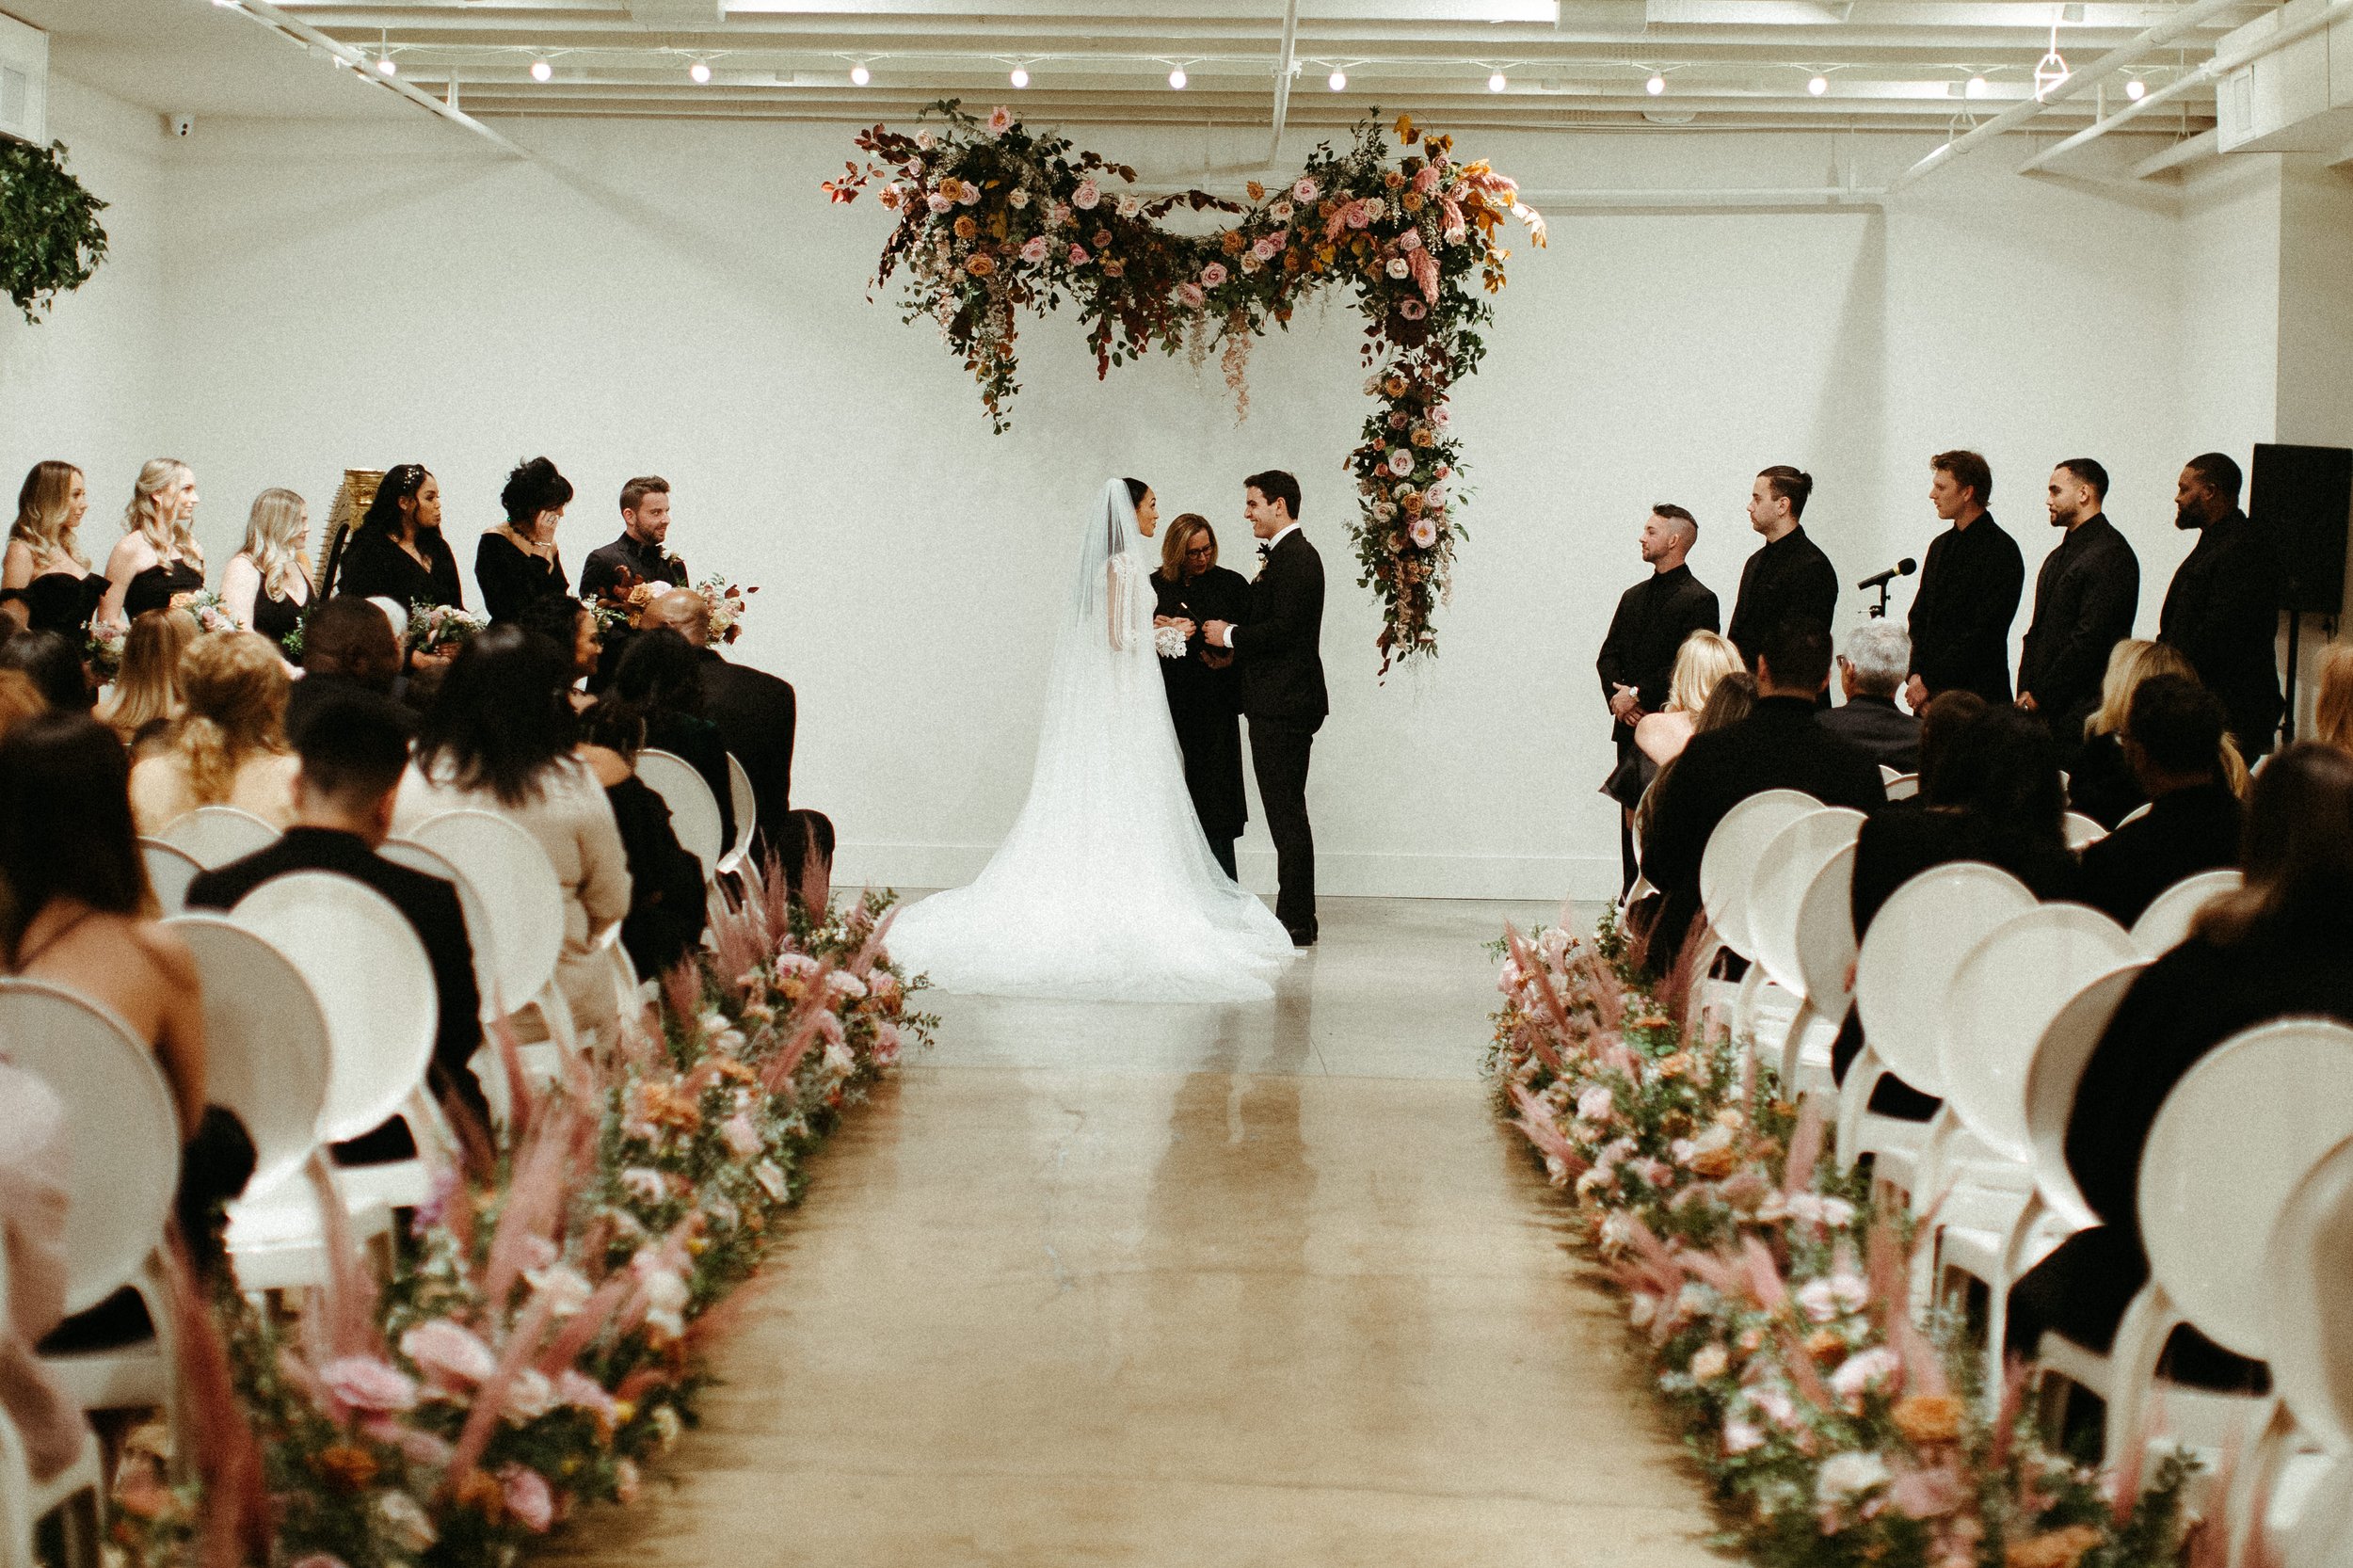 An eye-catching whimsical installation full of petal heavy roses and copper beech was the highlight of this art deco wedding. Terra cotta, burgundy, dusty pink, and other neutral florals warm up this ceremony. Designed by Rosemary and Finch in Nashvi